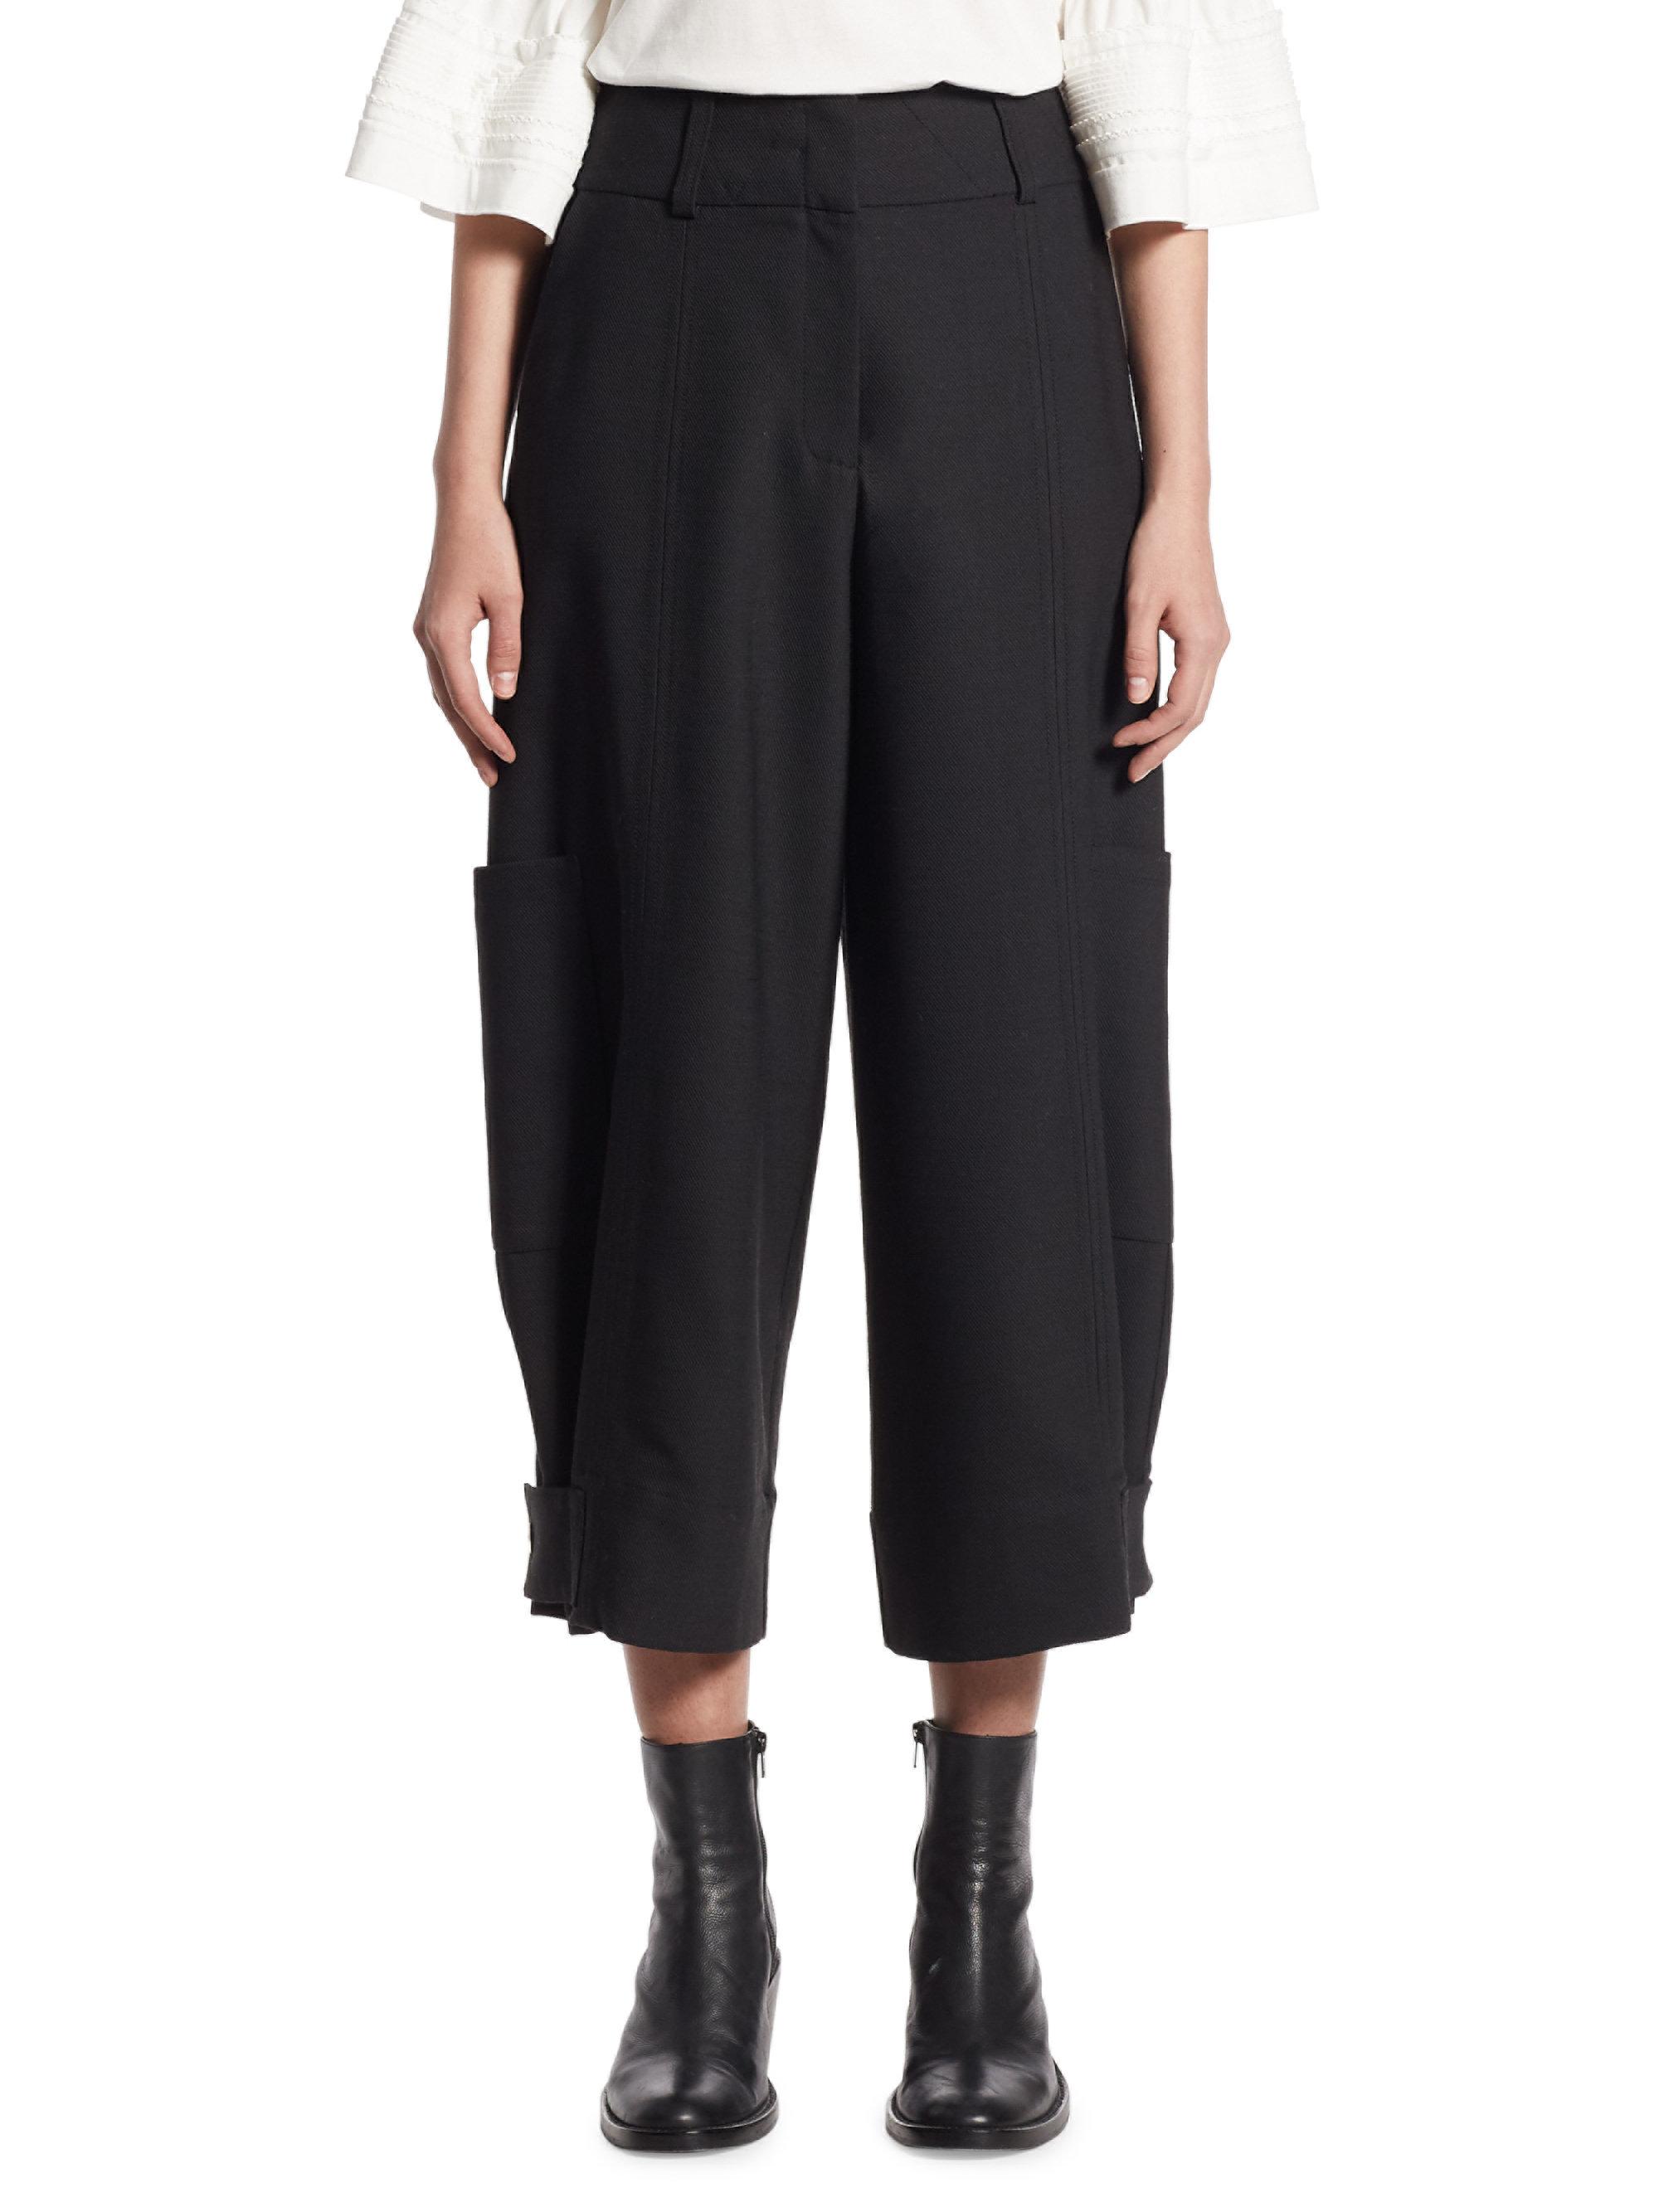 Lyst - See by chloé Wide Leg Cropped Trousers in Black